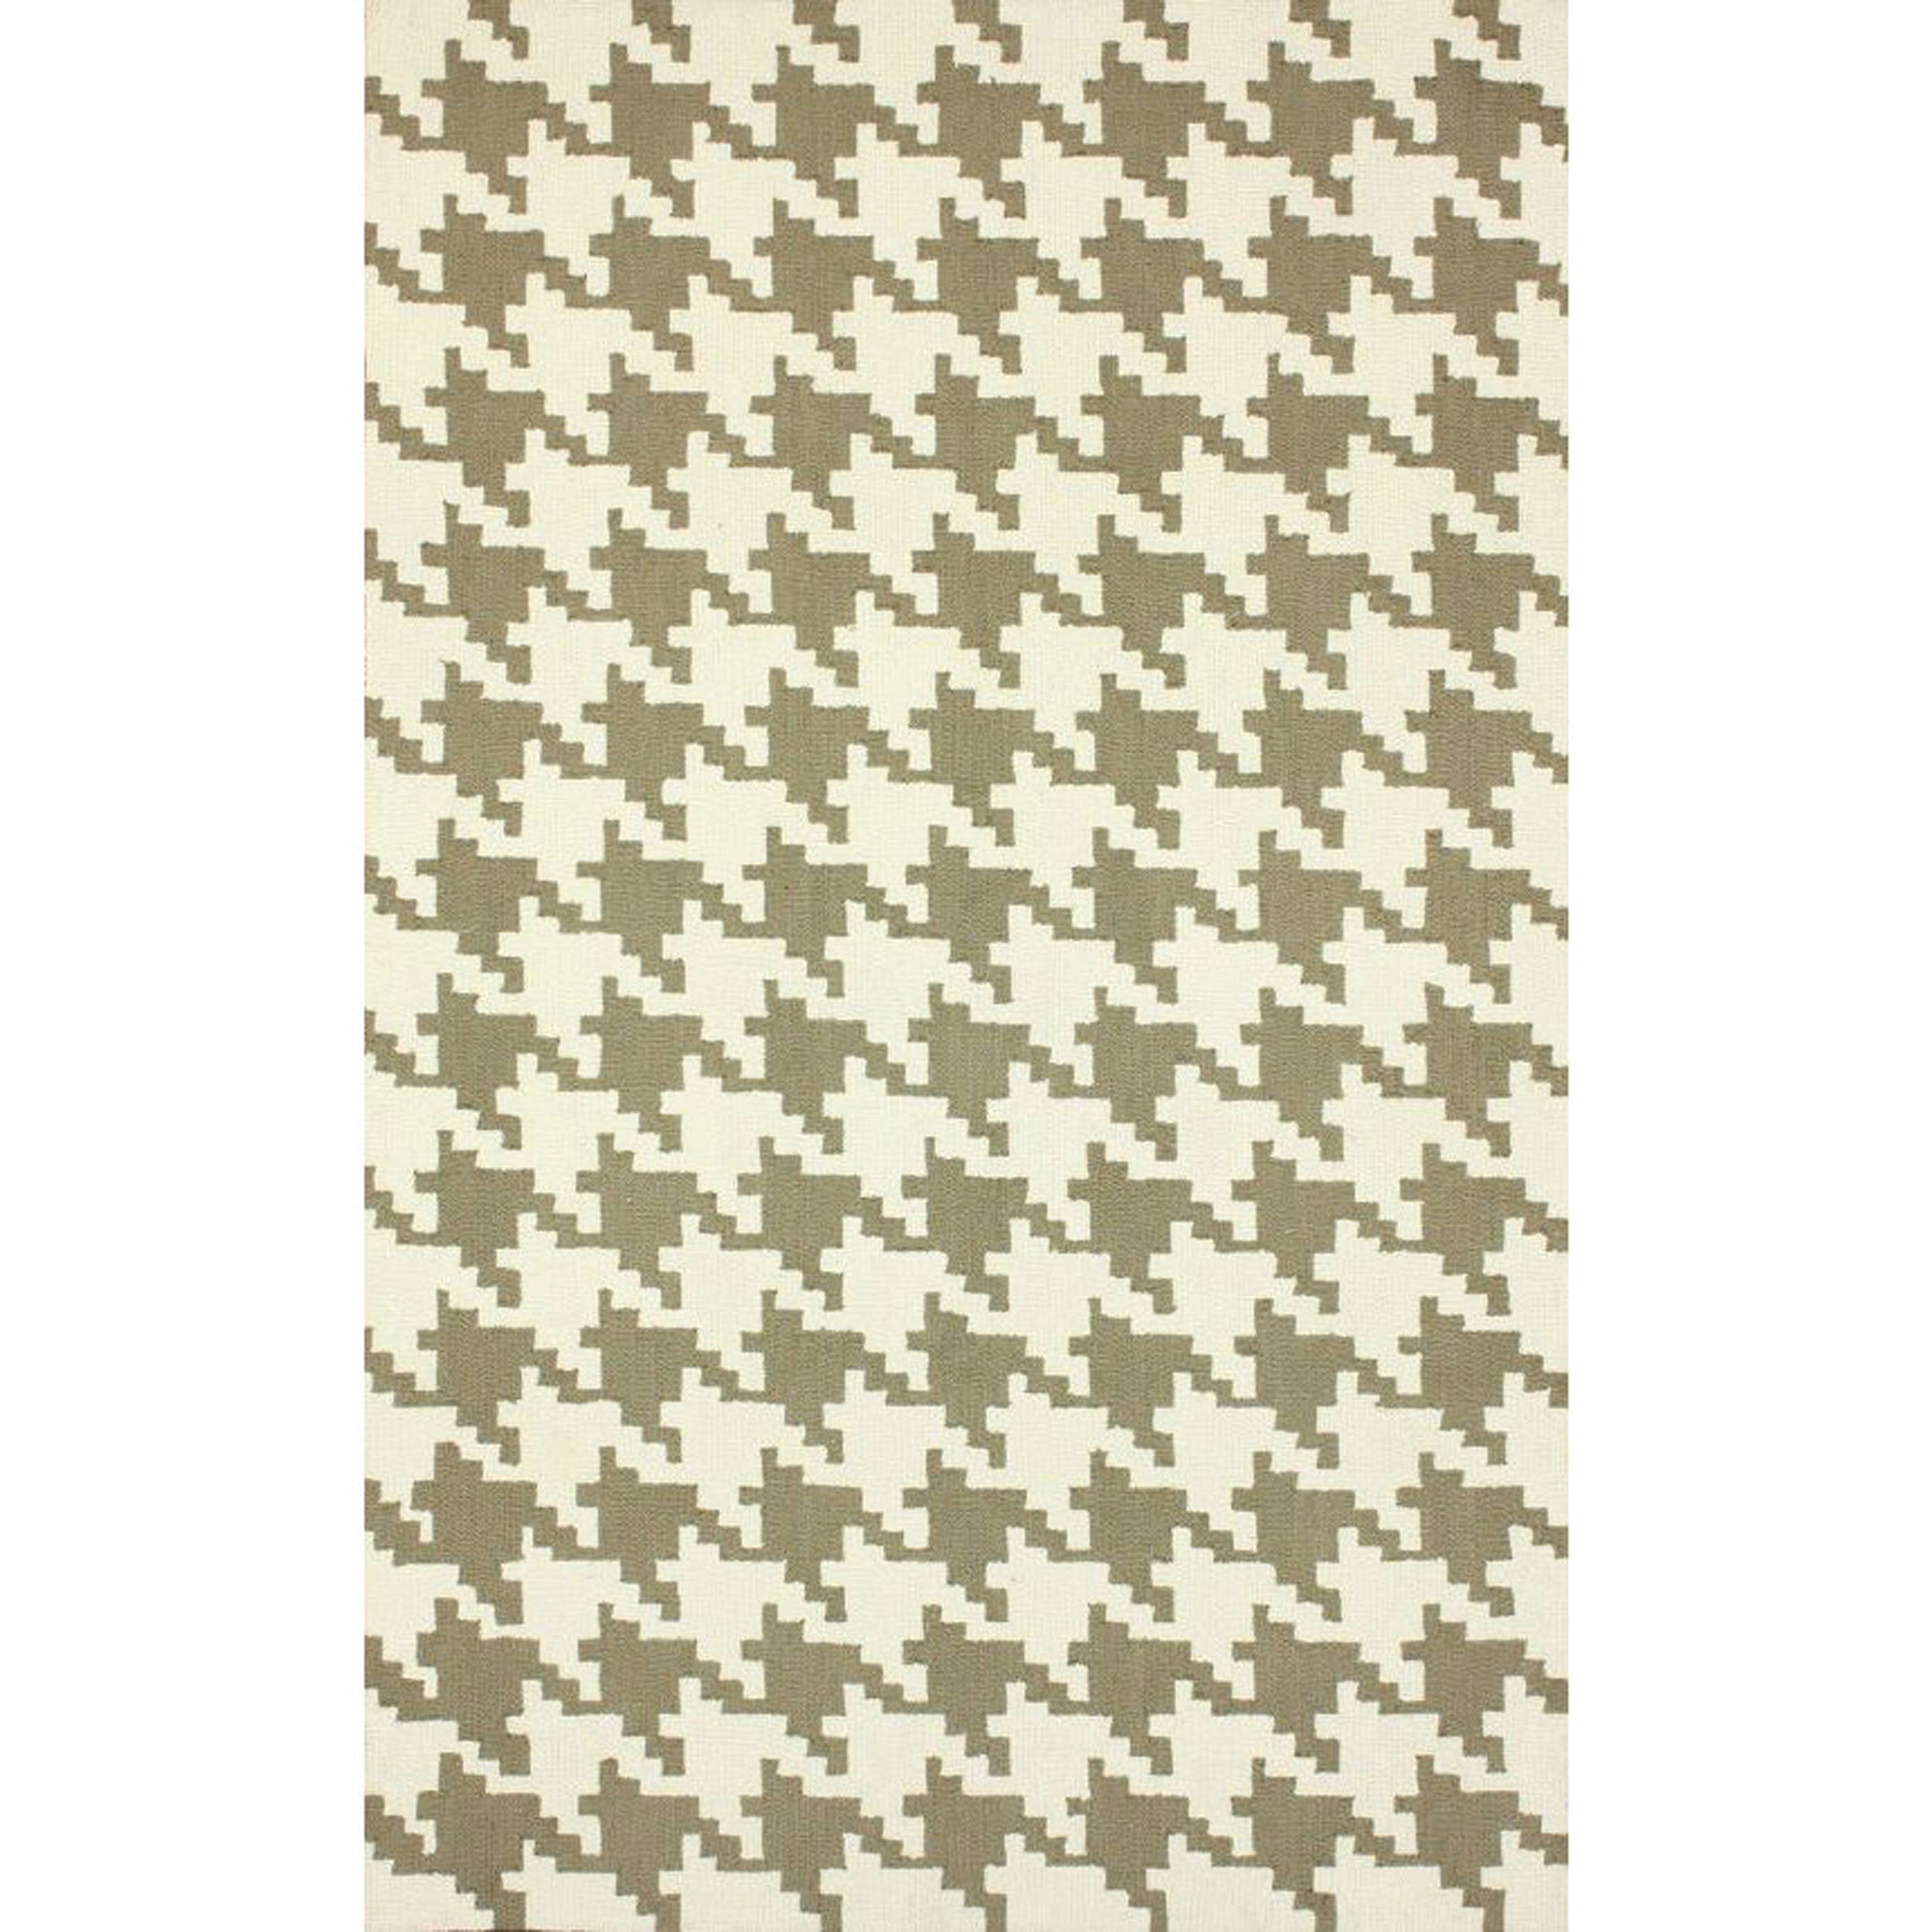 Nuloom Handmade Houndstooth Light Brown Wool Rug (5 X 8) (IvoryPattern AbstractTip We recommend the use of a non skid pad to keep the rug in place on smooth surfaces.All rug sizes are approximate. Due to the difference of monitor colors, some rug colors